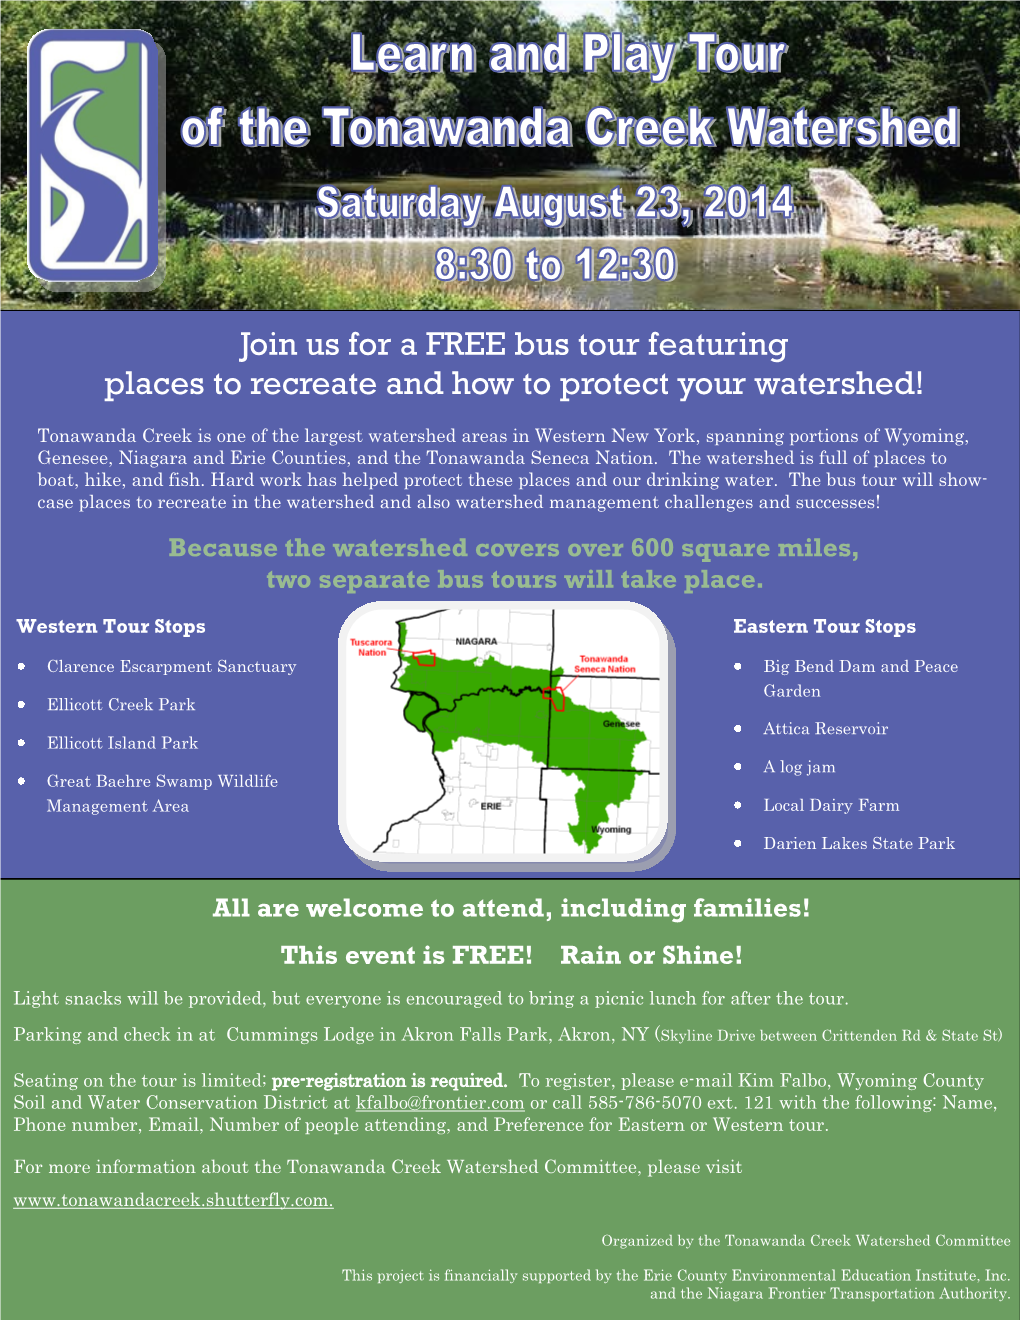 Join Us for a FREE Bus Tour Featuring Places to Recreate and How to Protect Your Watershed!